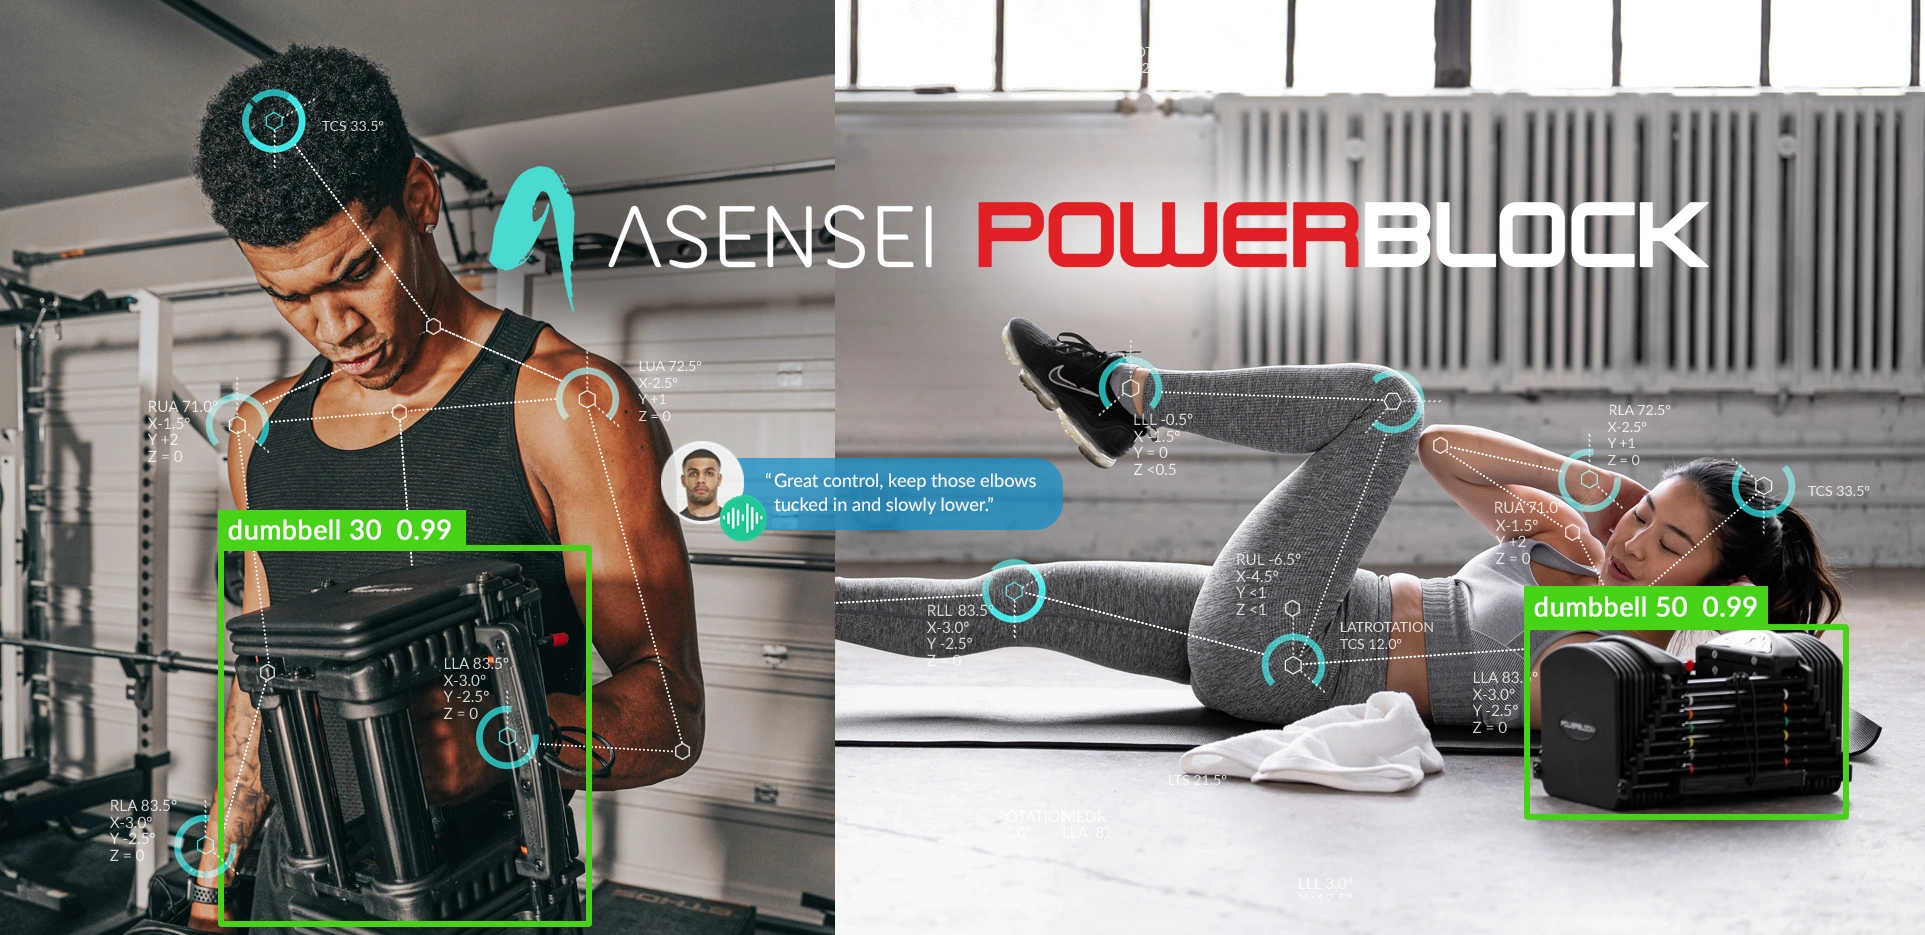 PowerBlock, Asensei Partner To 'Disrupt' Connected Fitness